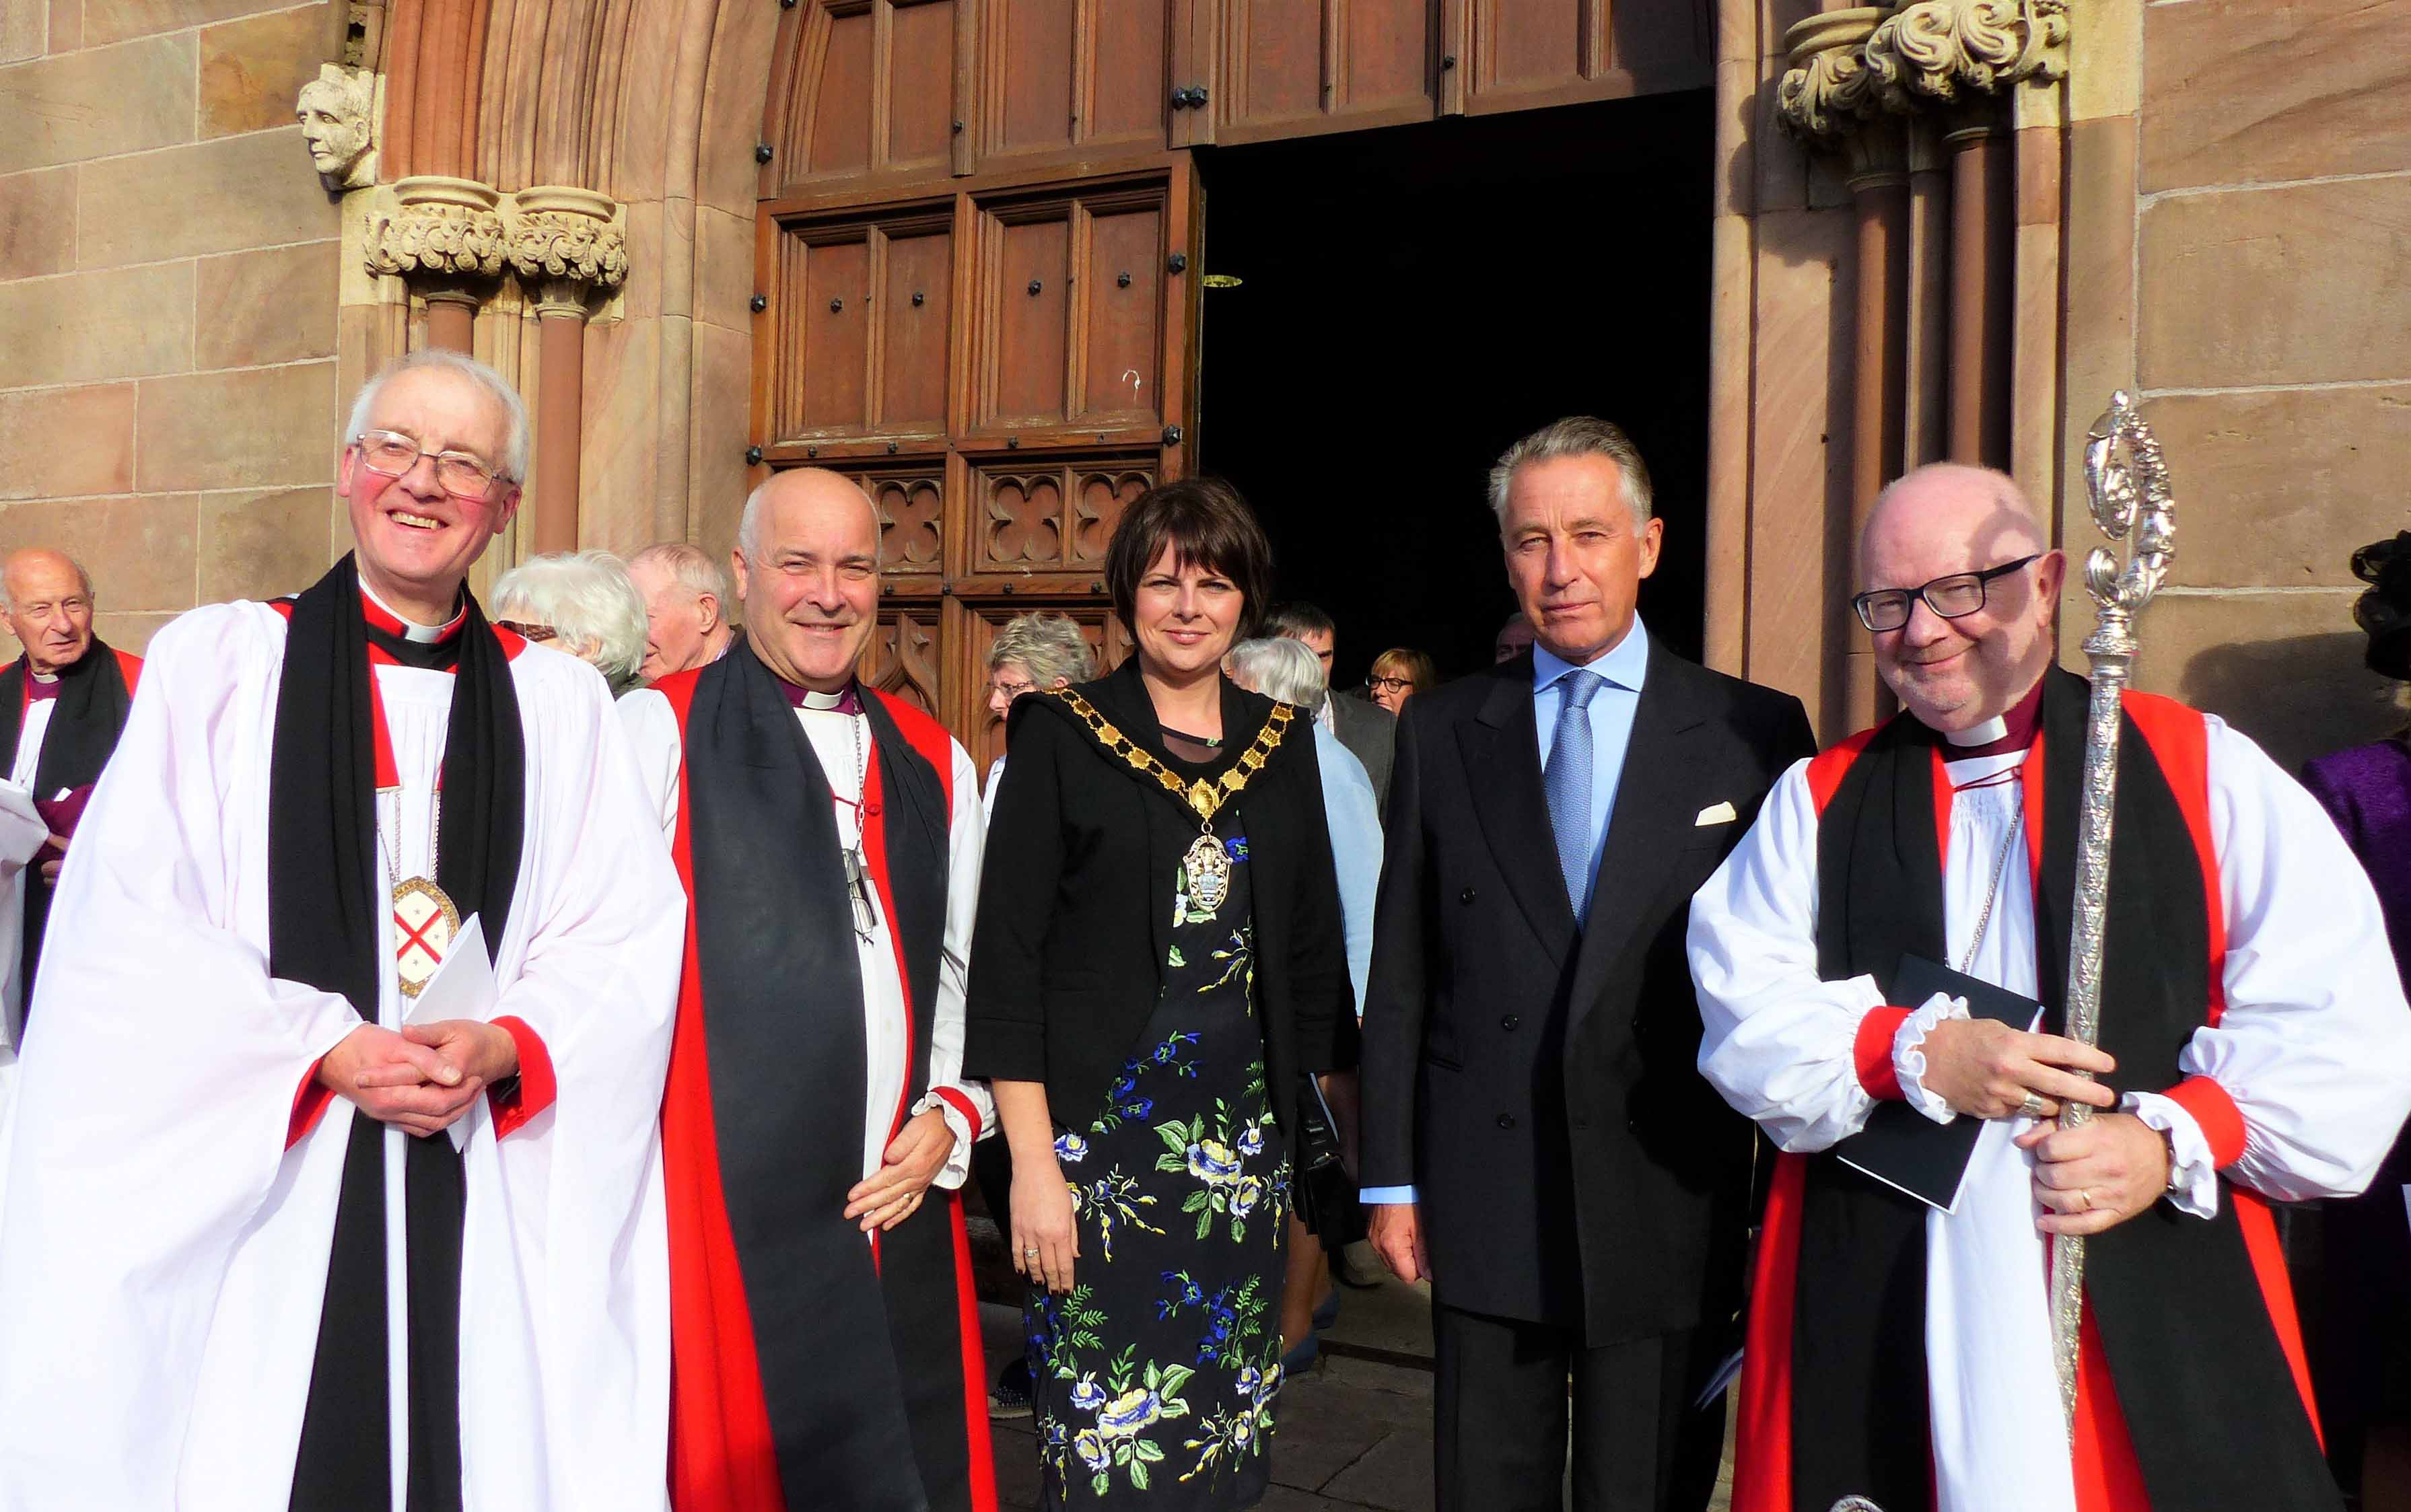 Left to right: The Dean of Armagh, Gregory Dunstan; Bishop Stephen Cottrell, Bishop of Chelmsford, preacher at the service; Lord Mayor of Armagh City, Banbridge and Craigavon, Councillor Julie Flaherty; the Lord Lieutenant for County Armagh, the Earl of Caledon; and Archbishop of Armagh, Richard Clarke.